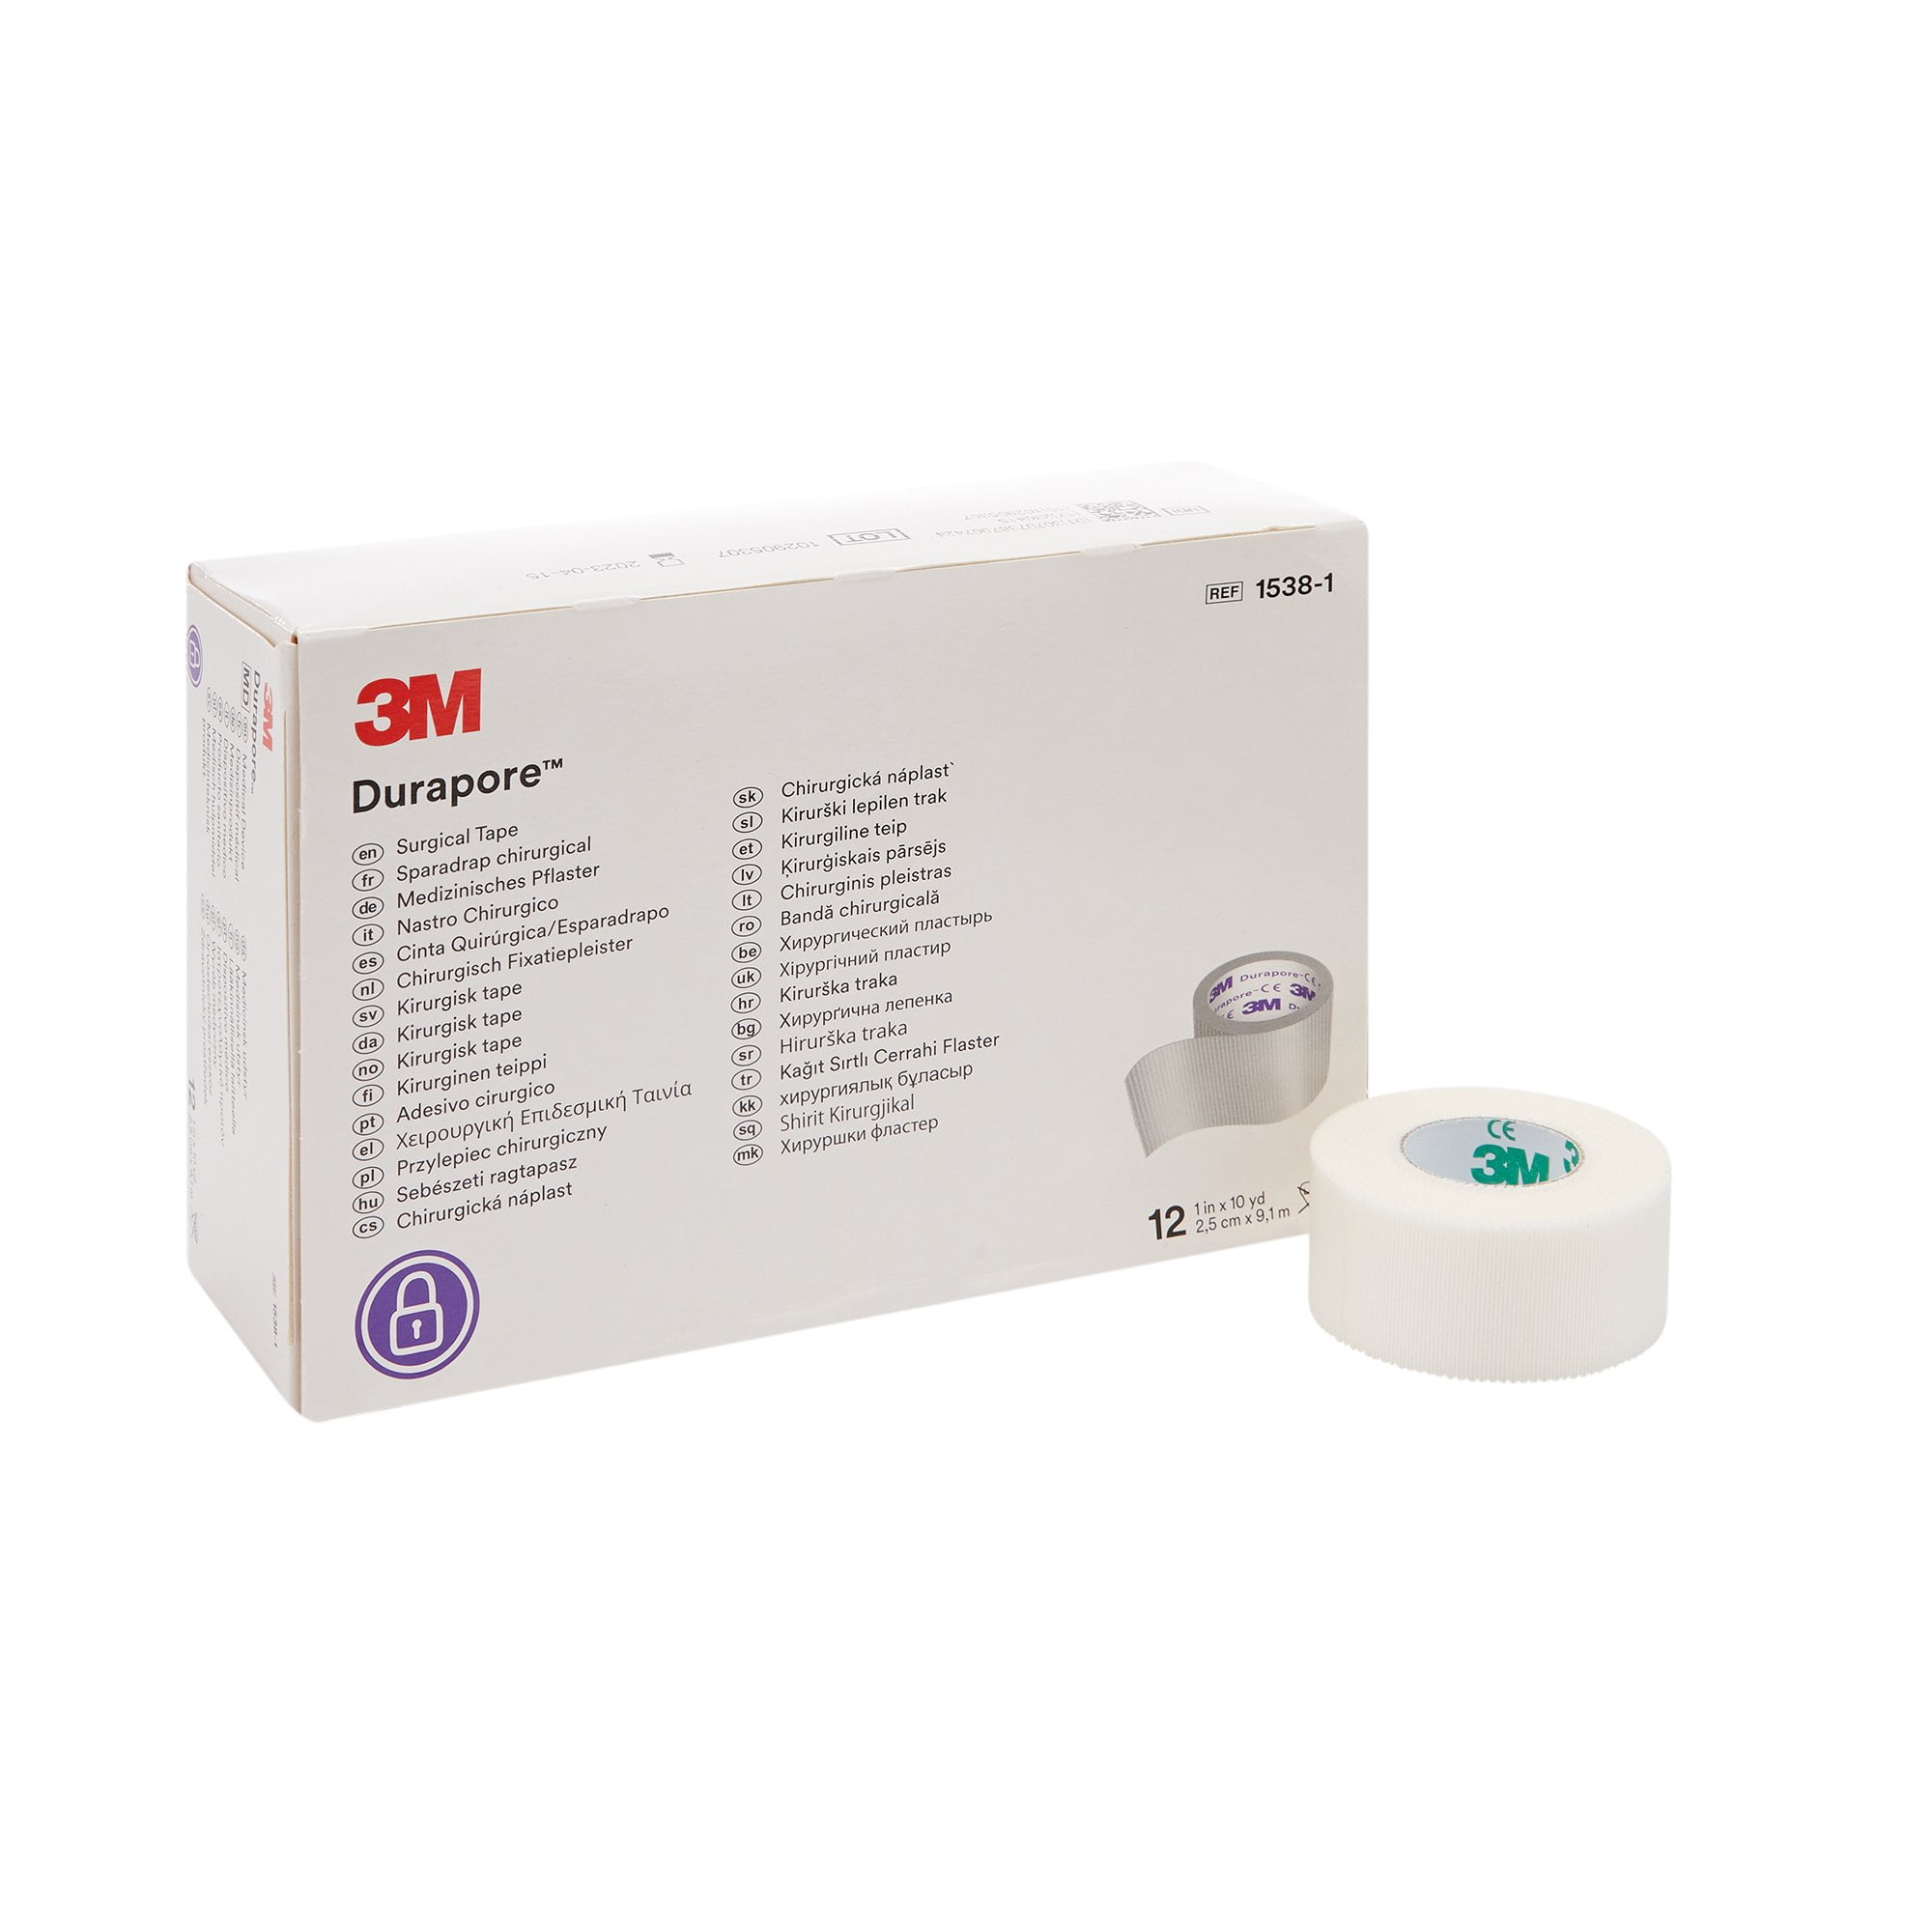 3M Micropore Surgical Tape 1 x 10 Yd 1530-1, 3 Boxes, 12 Rolls/Box